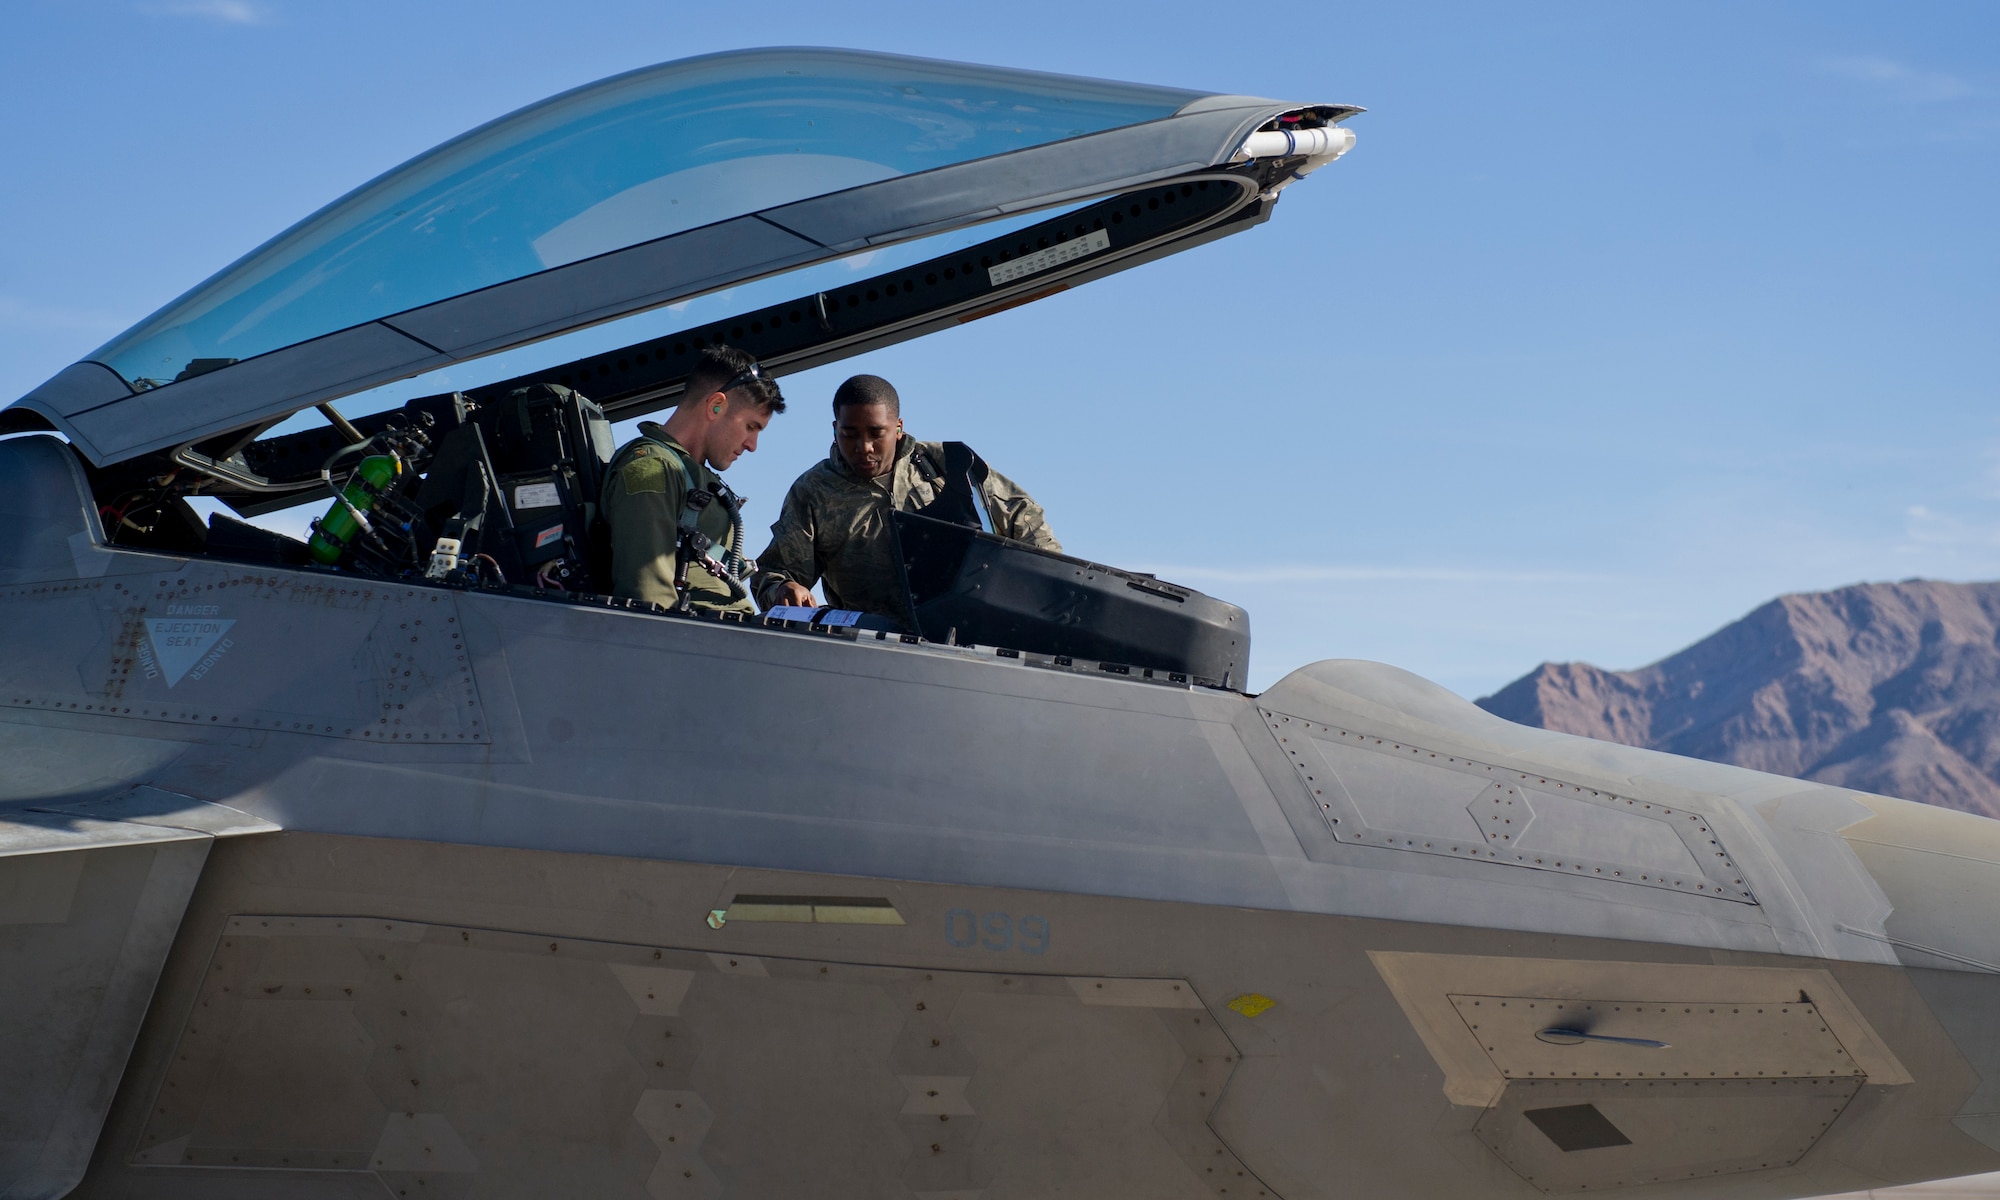 Major Scott Crowell, 325th Operations Group F-22 Raptor pilot, and Senior Airmen Eric Woods, 95th Aircraft Maintenance Unit crew chief, talk before Crowell takes flight on the first day of Red Flag 16-1, Jan. 25 at Nellis AFB, Nev. Integration is key at Red Flag, and Tyndall’s F-22s and Airmen join more than 130 aircraft and 3,000 personnel training during the exercise. (U.S. Air Force photo by Senior Airman Alex Fox Echols III/Released)  